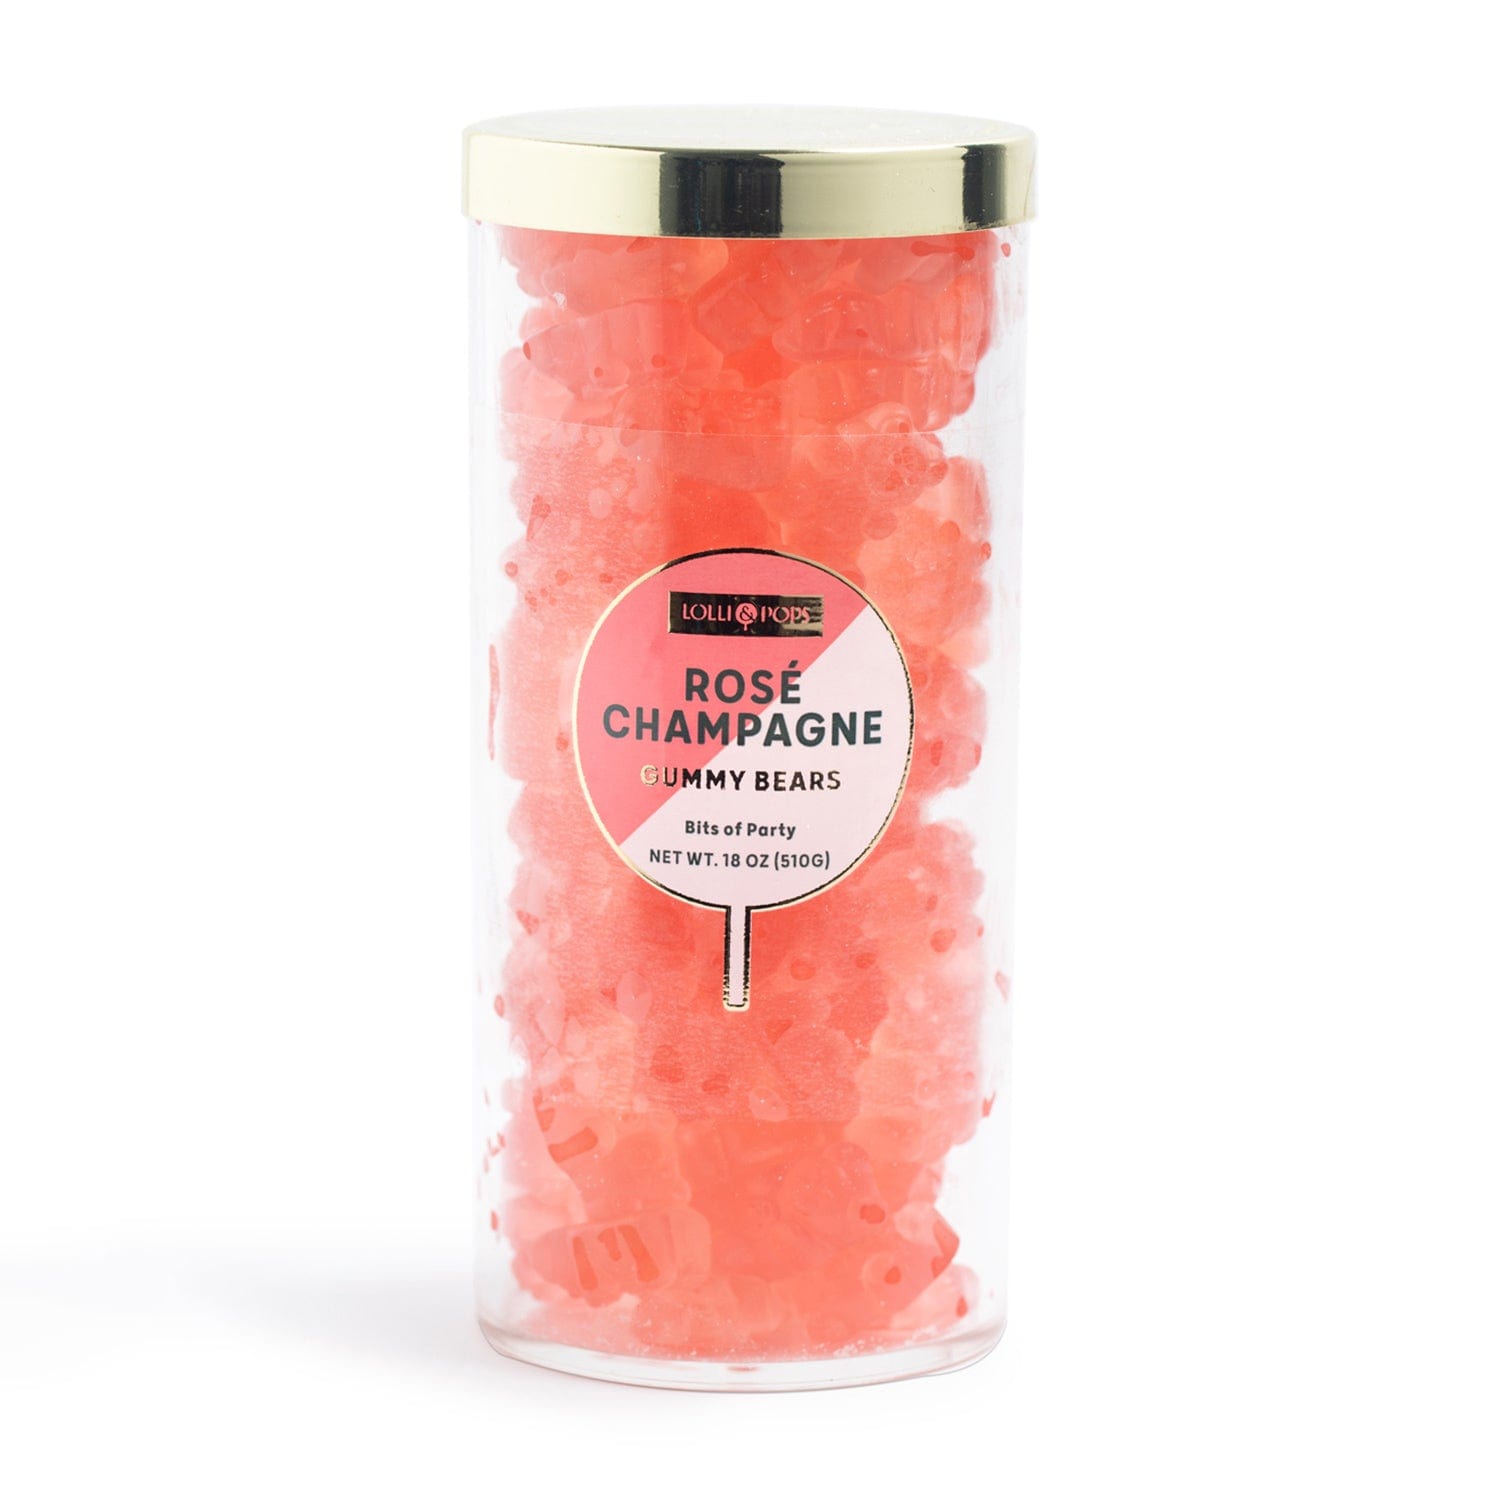 https://cdn.shopify.com/s/files/1/1341/1521/files/lolli-and-pops-l-p-collection-rose-champagne-large-gummy-bears-tube-34745794855112_1600x.jpg?v=1701840778